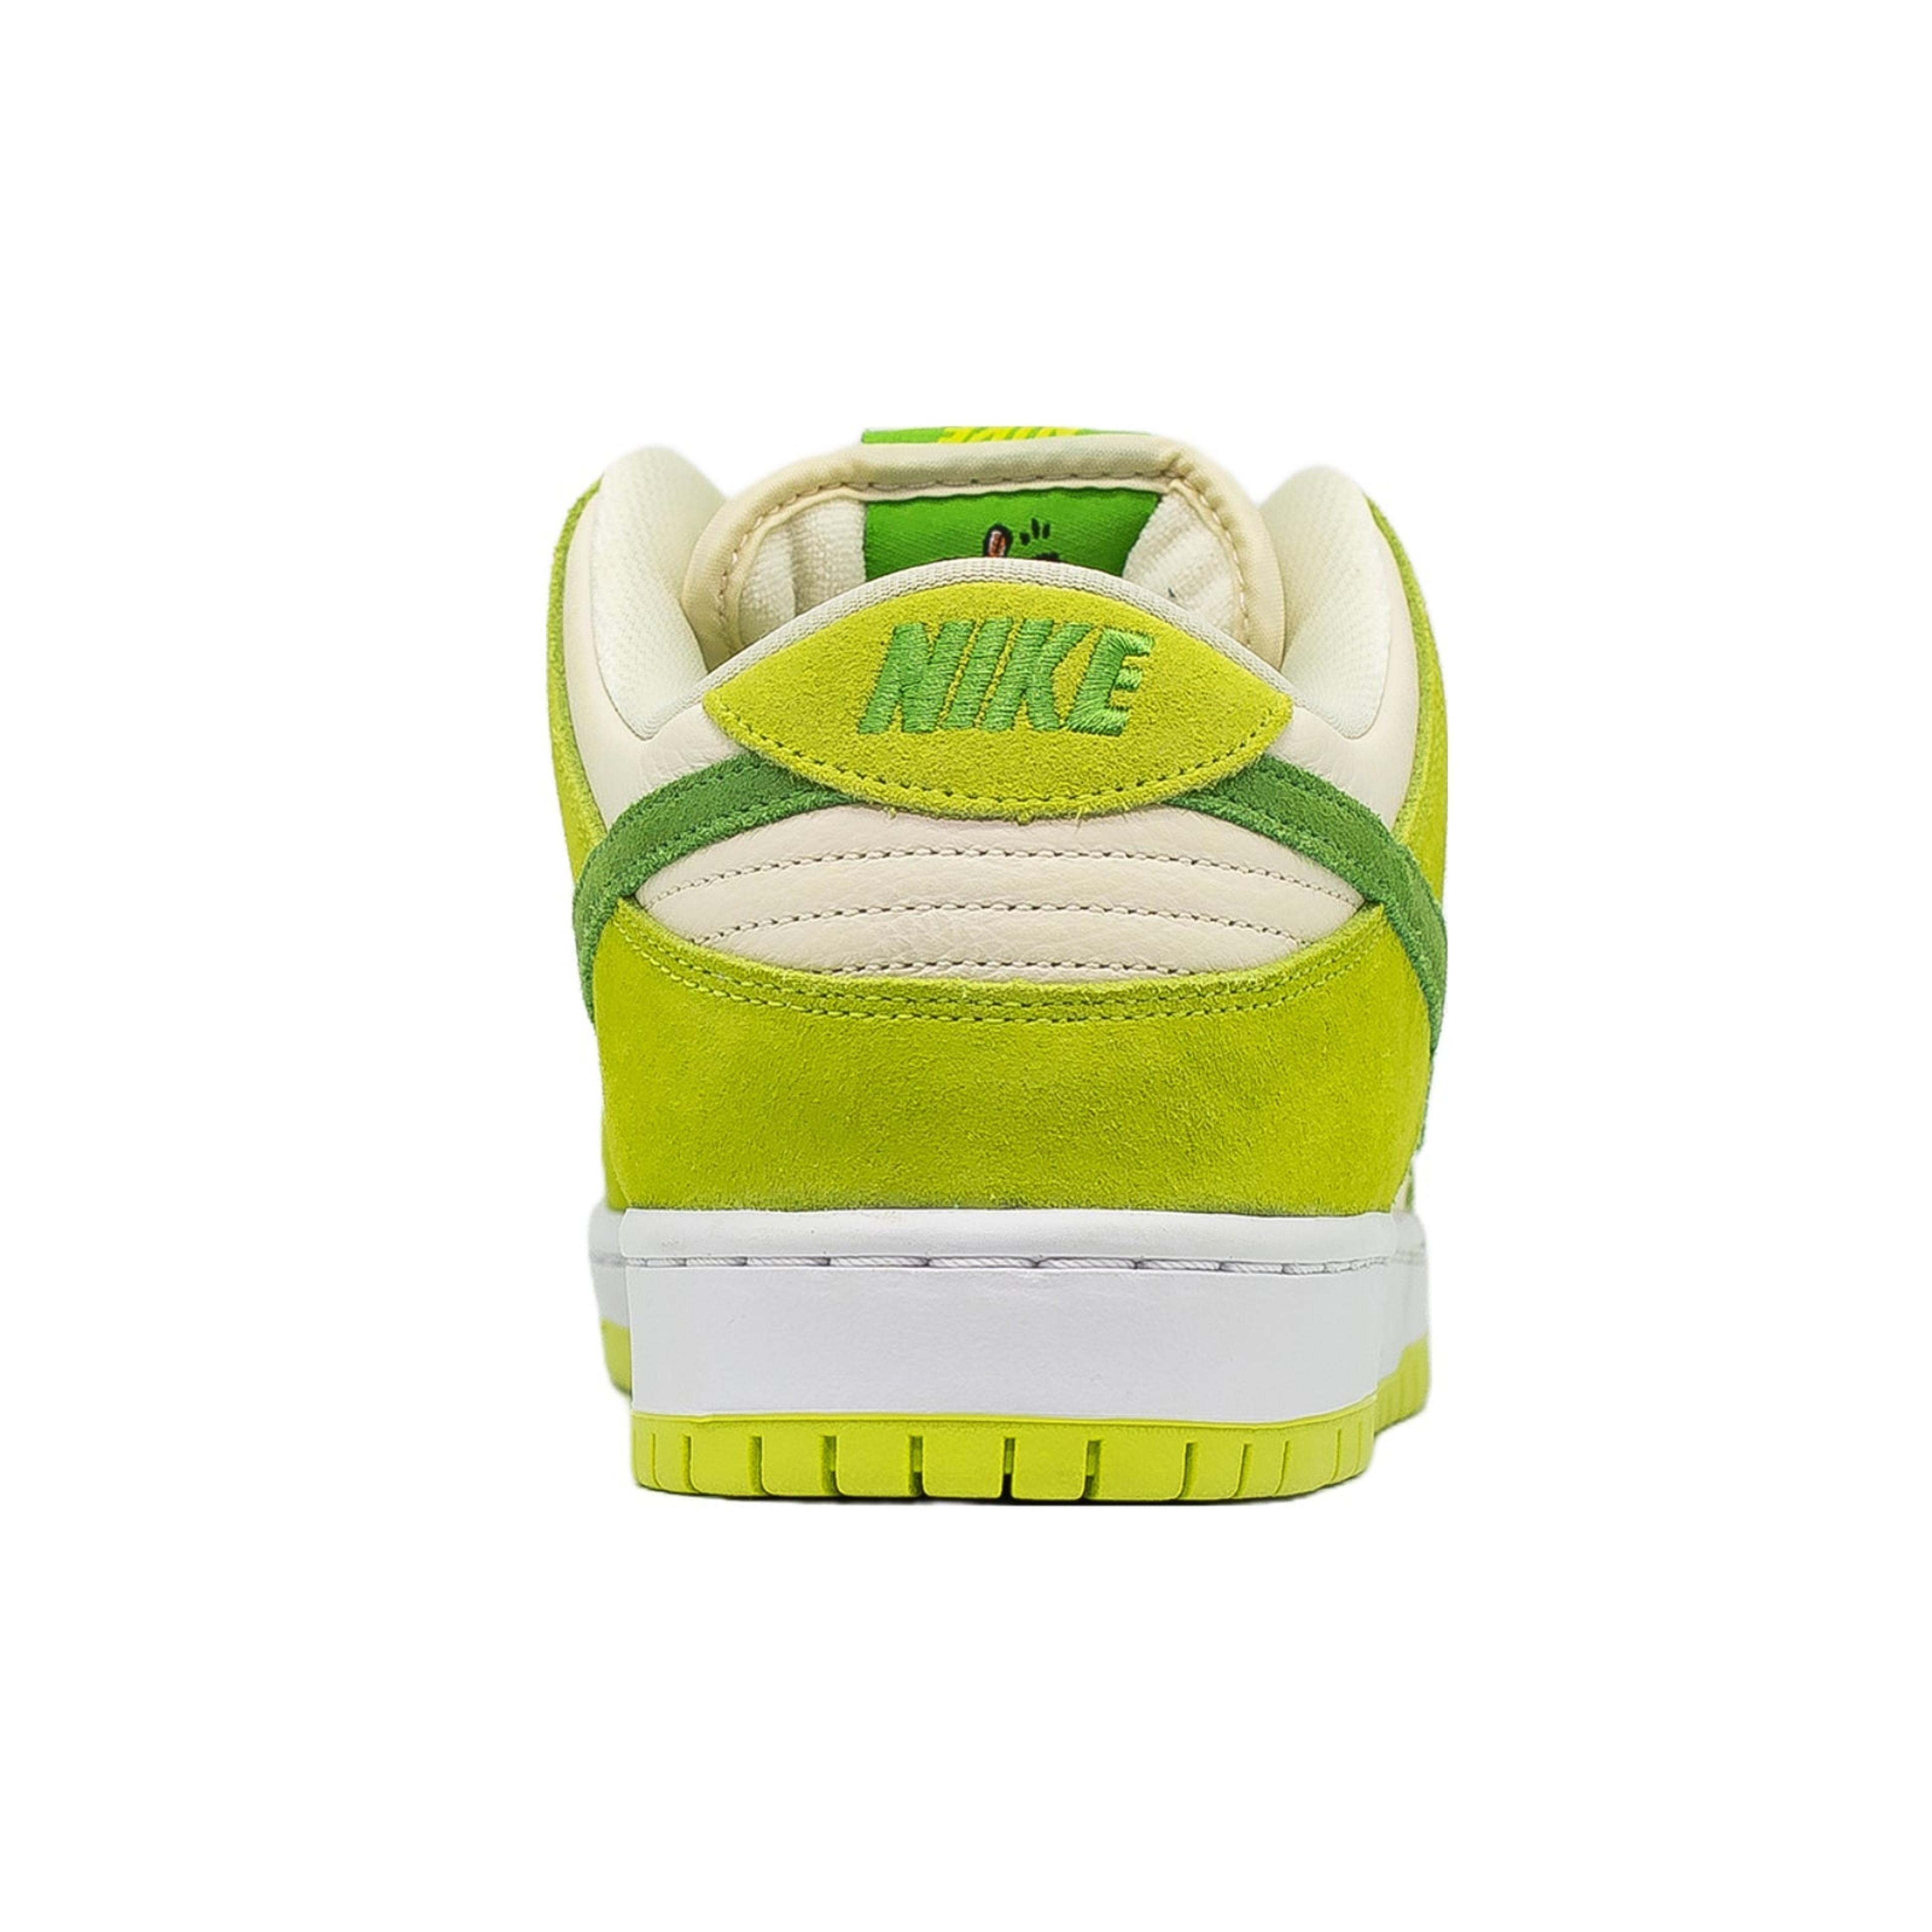 Alternate View 2 of Nike SB Dunk Low, Fruity Pack - Green Apple